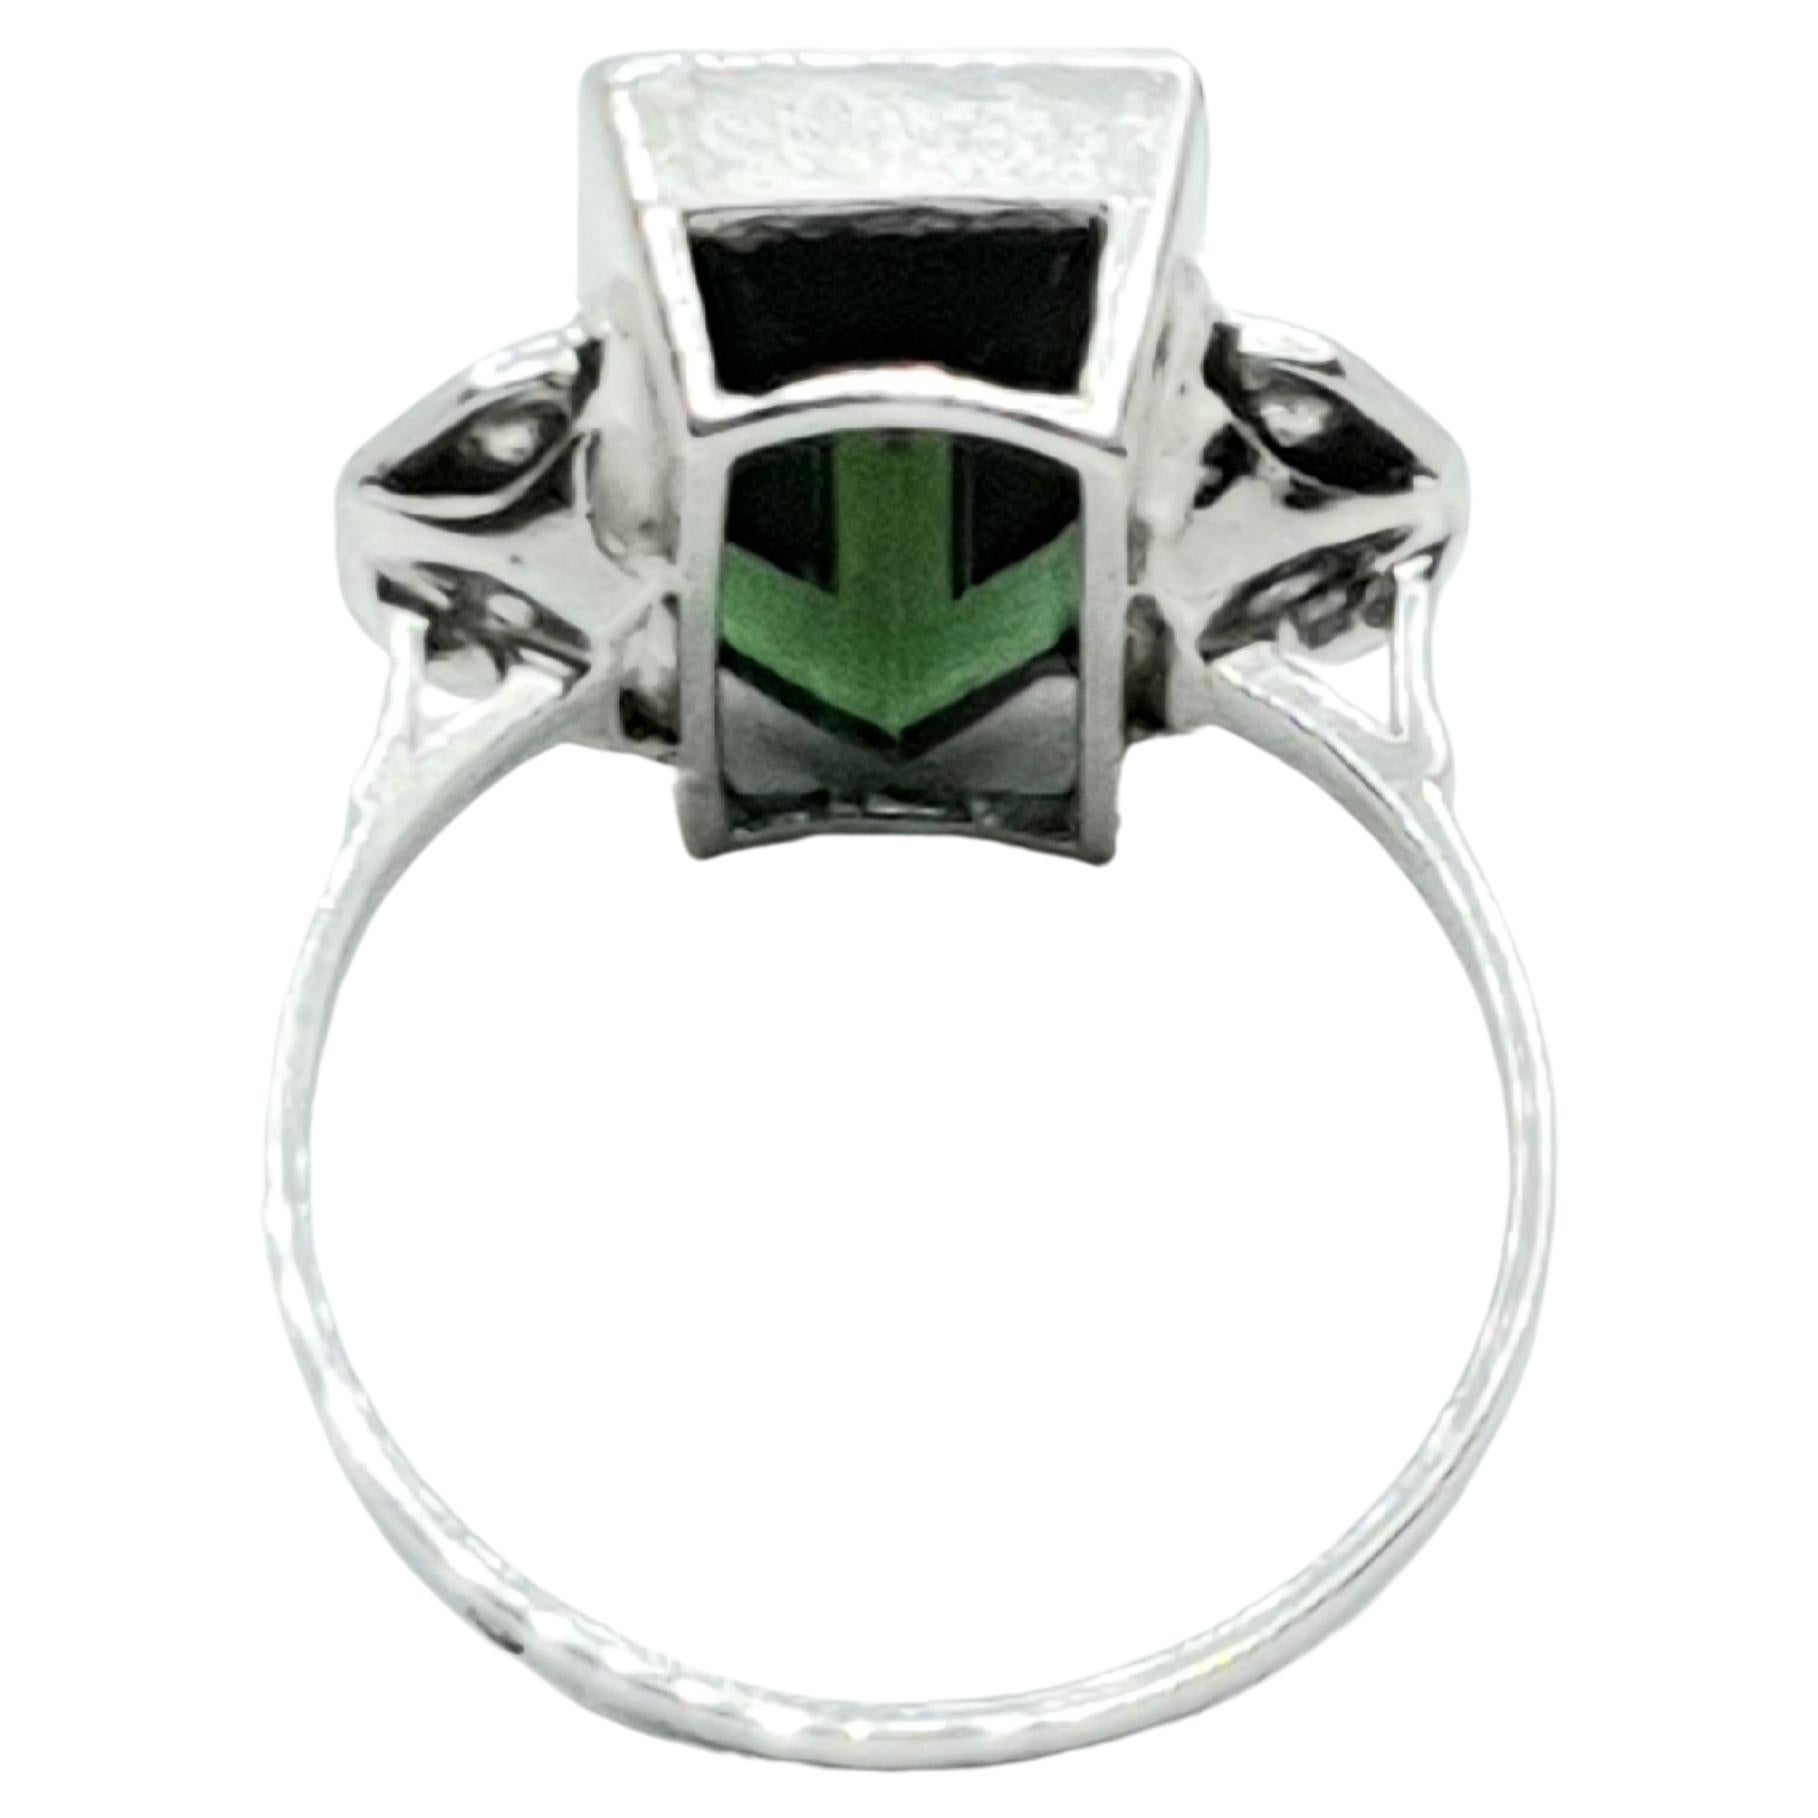 Antique green tourmaline white gold ring. The center green stone is oblong shape  and very vibrant color. Small old diamonds are set on both sides.  This French origin ring is unique looking.
The tourmaline size:13mmx6mm